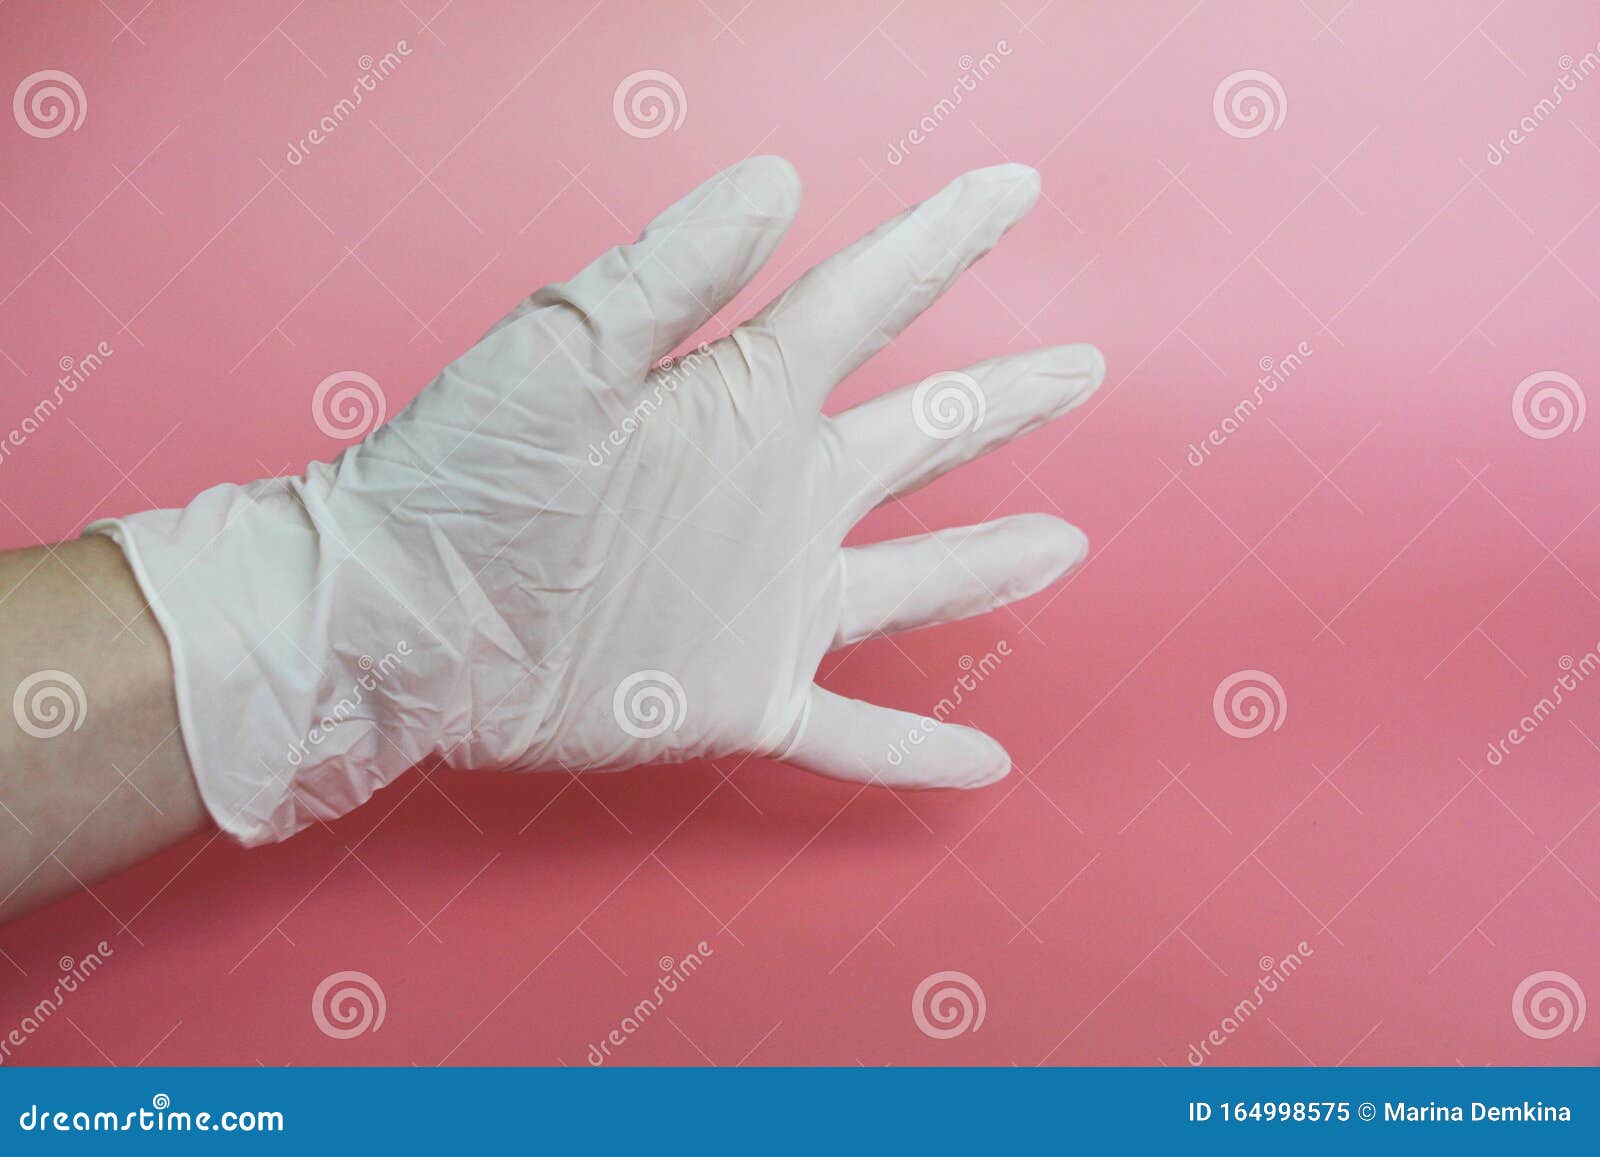 Medical White Latex Glove On A Female Hand Stock Image Image Of Latex